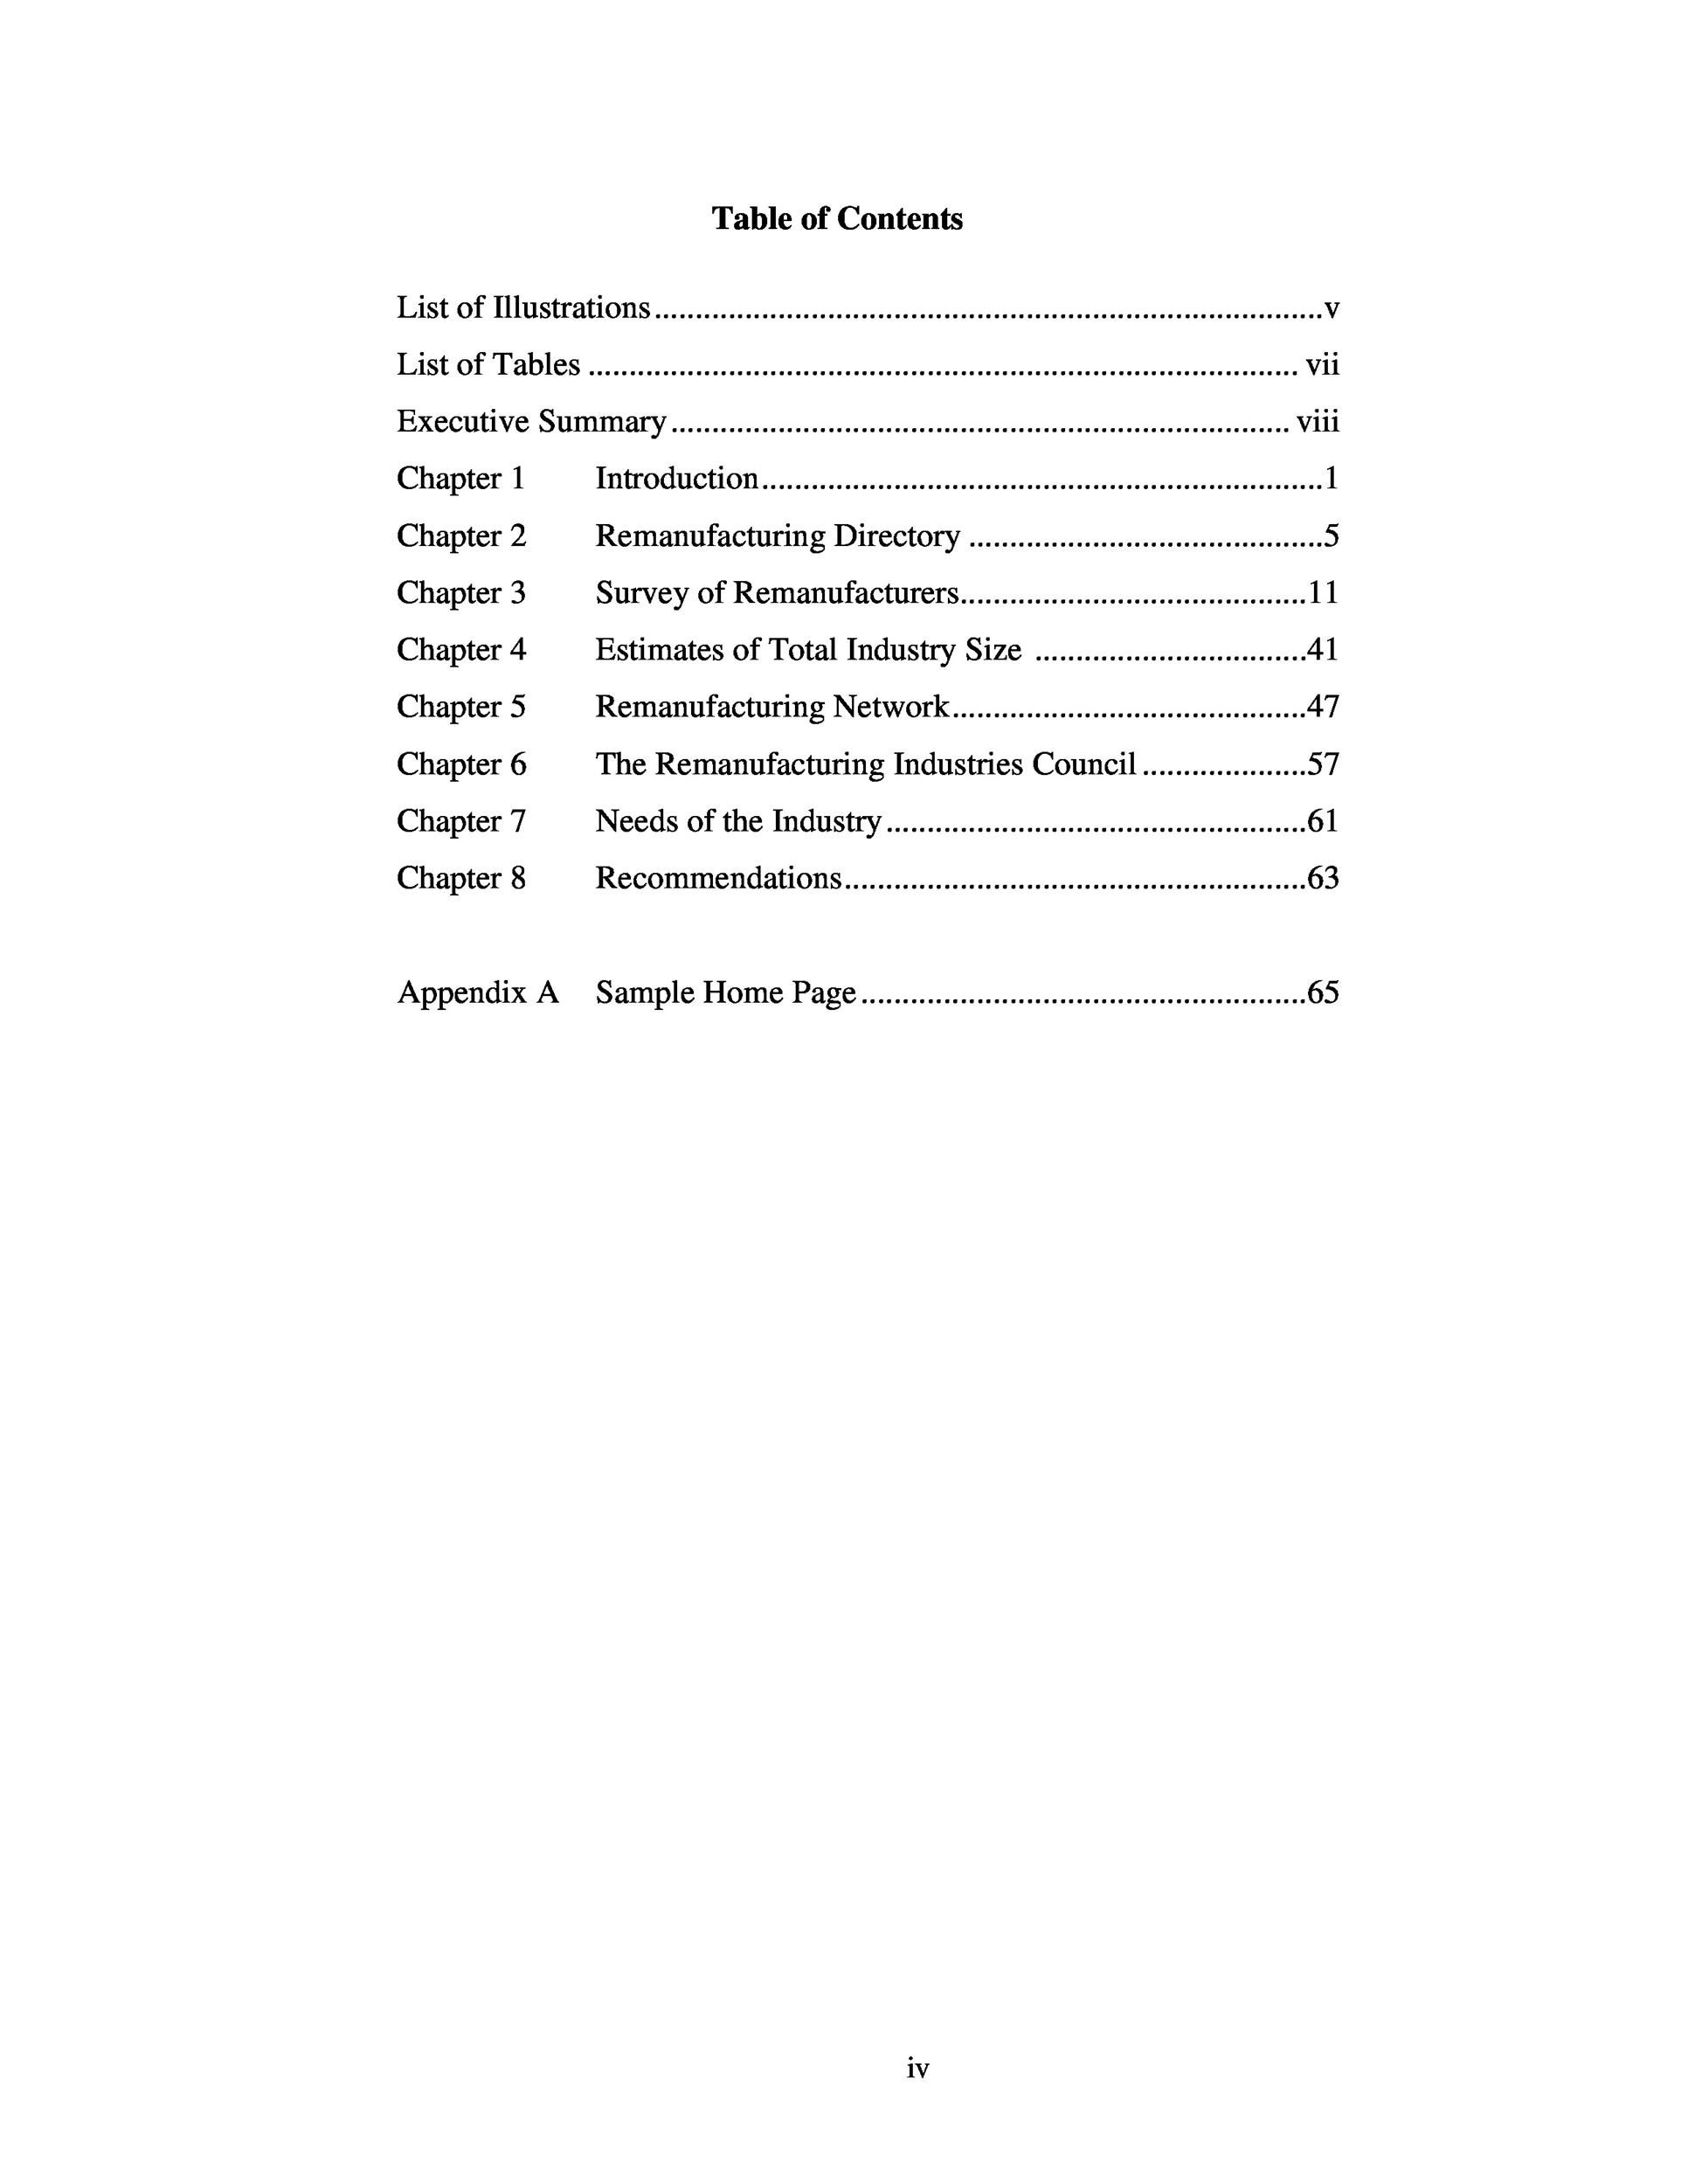 apa-format-table-of-contents-appendices